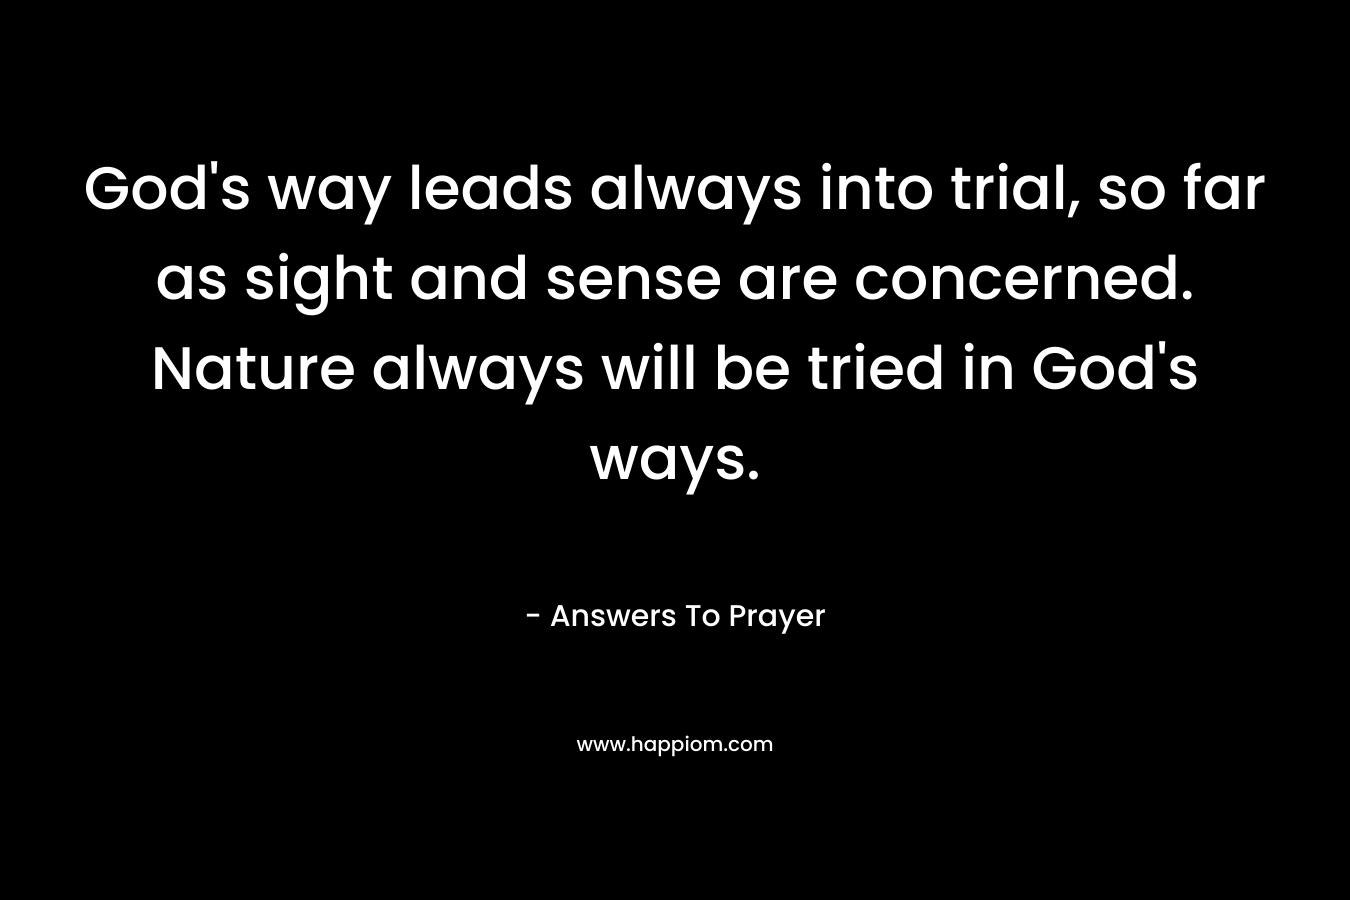 God’s way leads always into trial, so far as sight and sense are concerned. Nature always will be tried in God’s ways. – Answers To Prayer